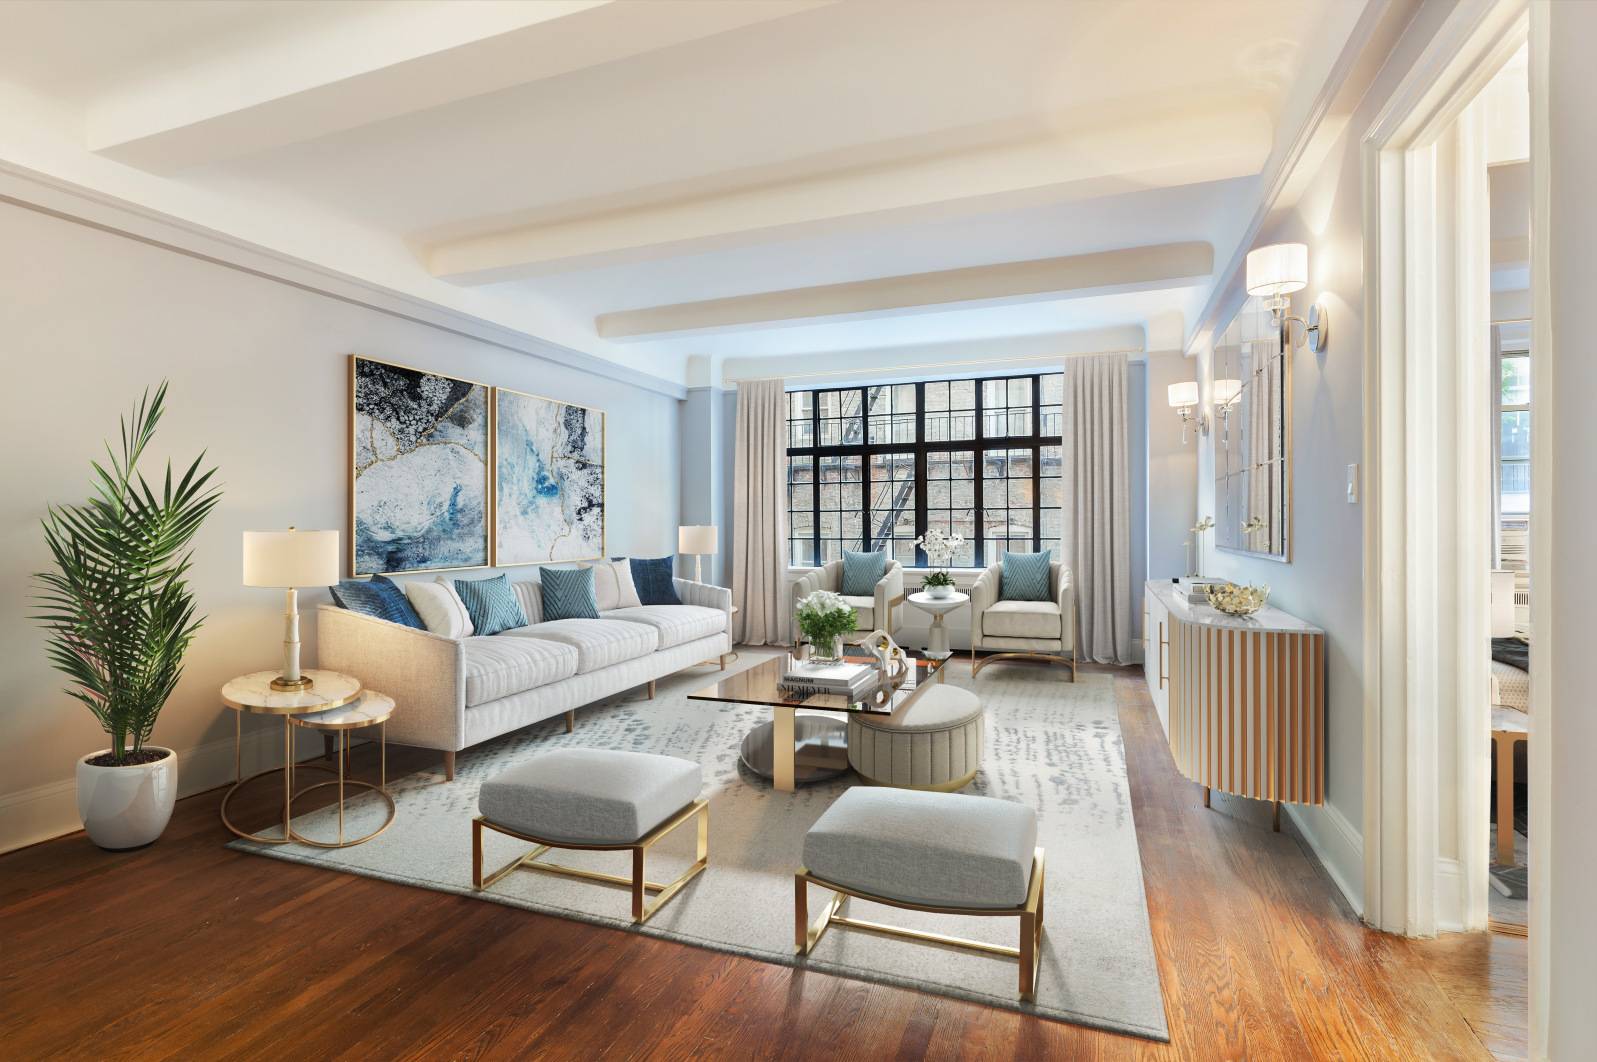 Key to Gramercy Park ! ! This newly renovated very large 1 bedroom 1 bath apartment is located in a premier pre war building on Gramercy Park.